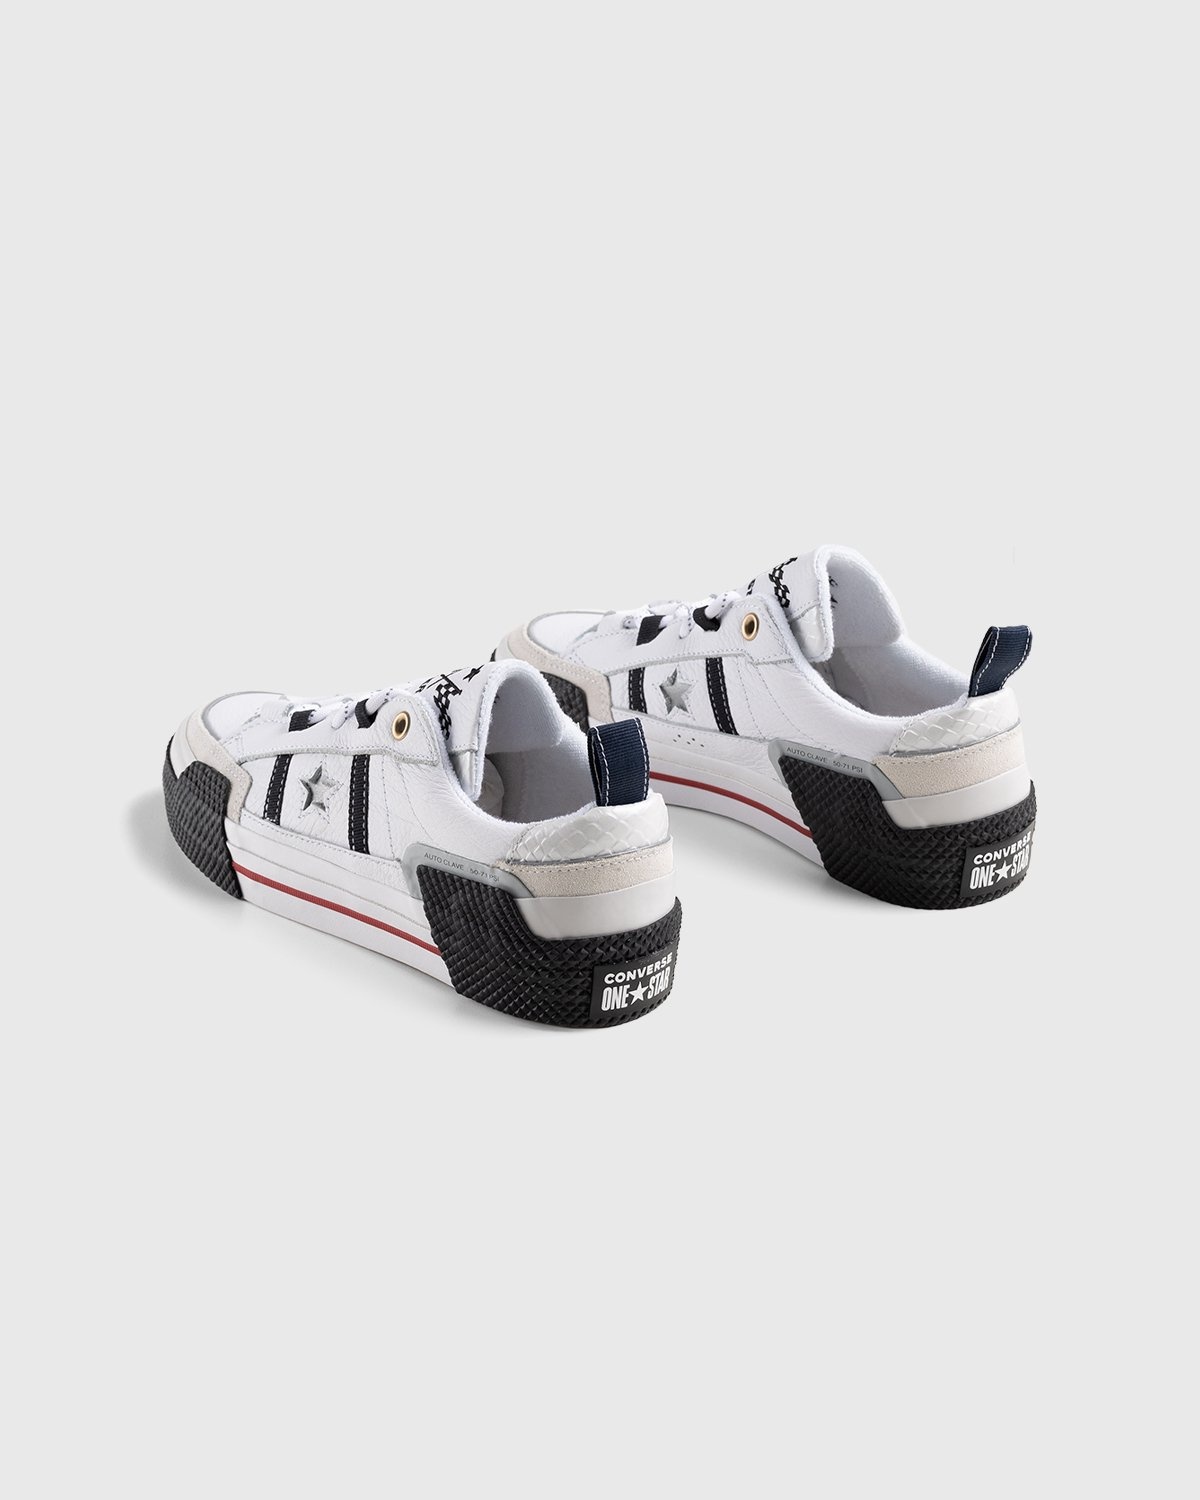 Converse x IBN Japser – One Star Ox White/Black/White - Low Top Sneakers - White - Image 3